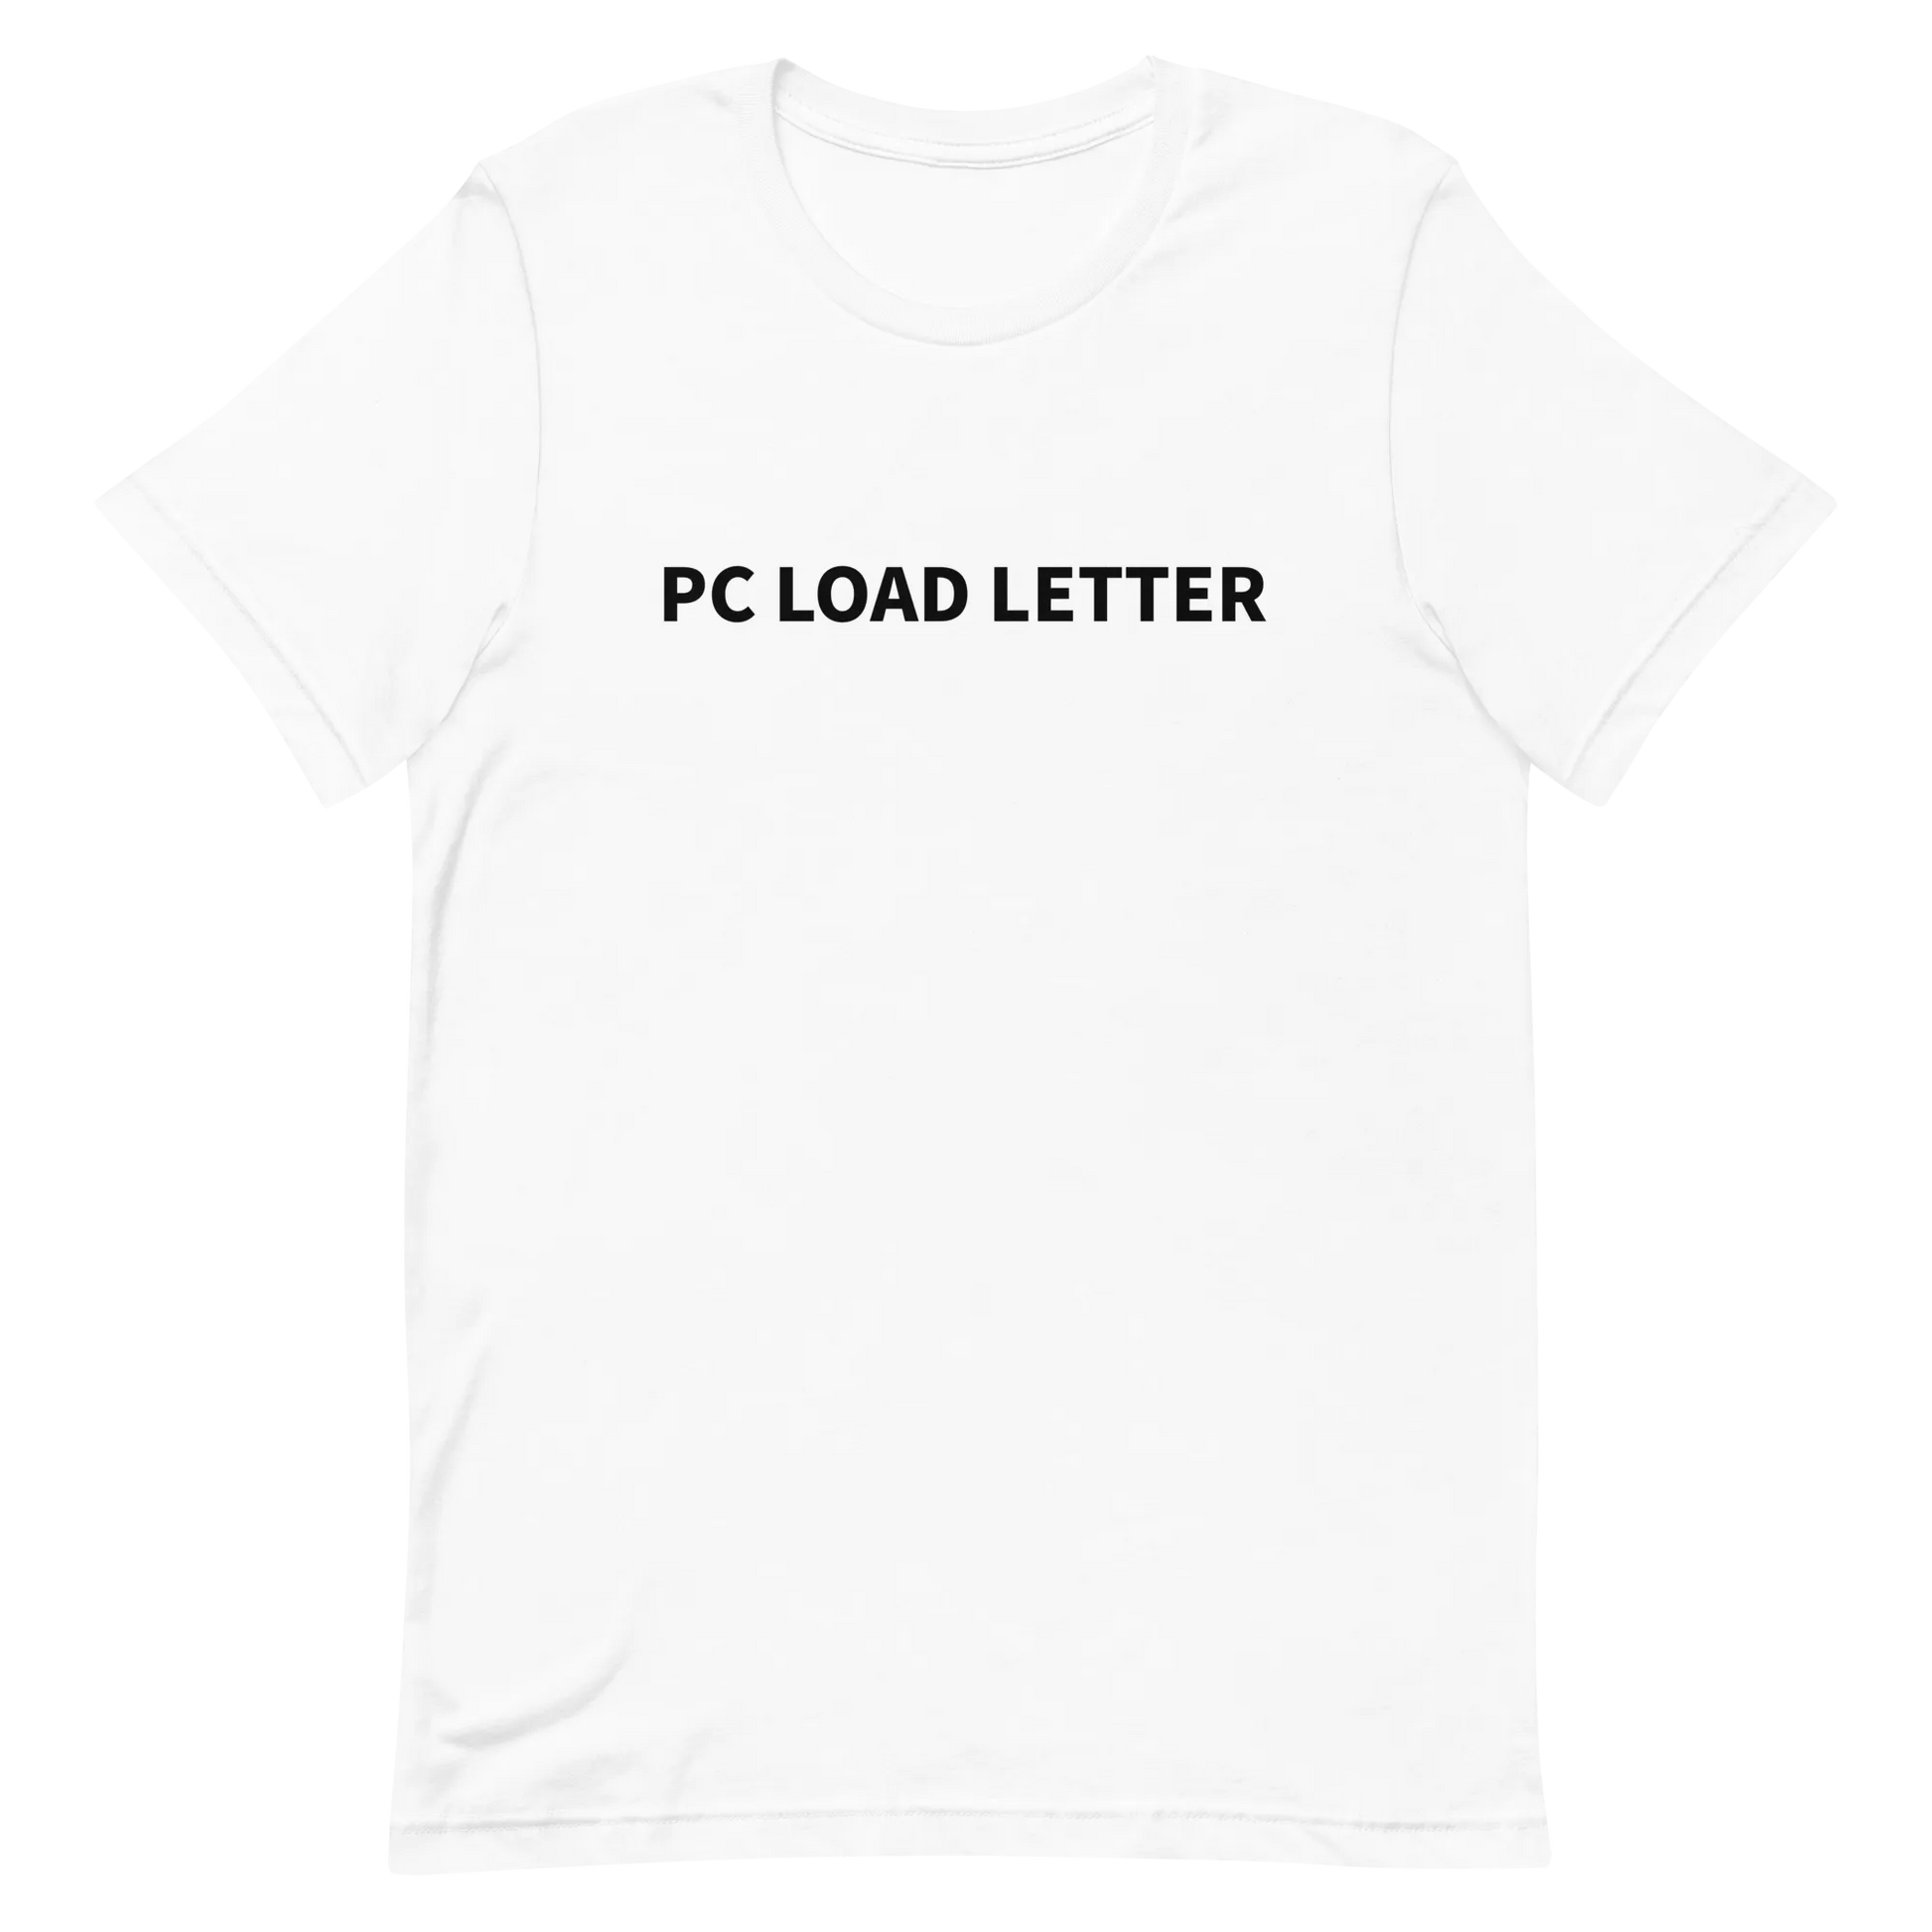 PC Load Letter Tee in White flatlay